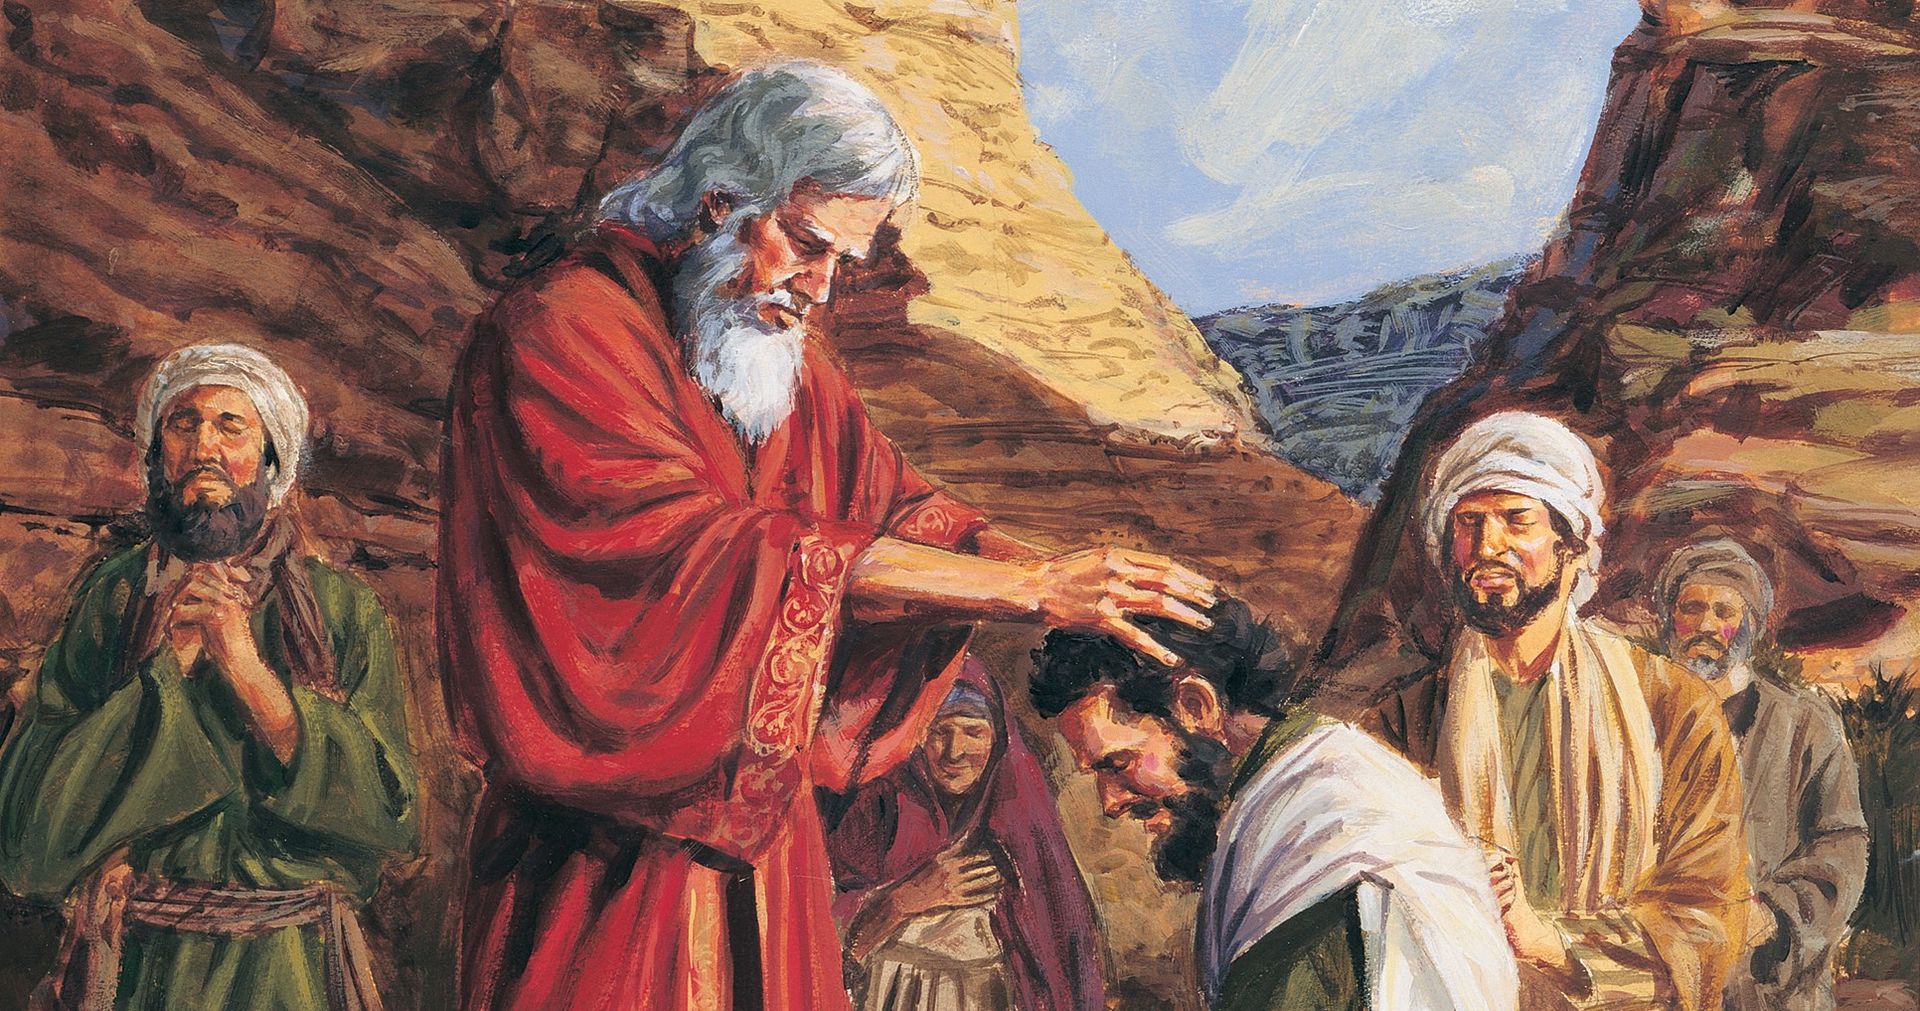 The prophet Moses laying his hands on Joshua's head to ordain him to lead the Israelites. A few other people stand by with their eyes closed prayerfully.